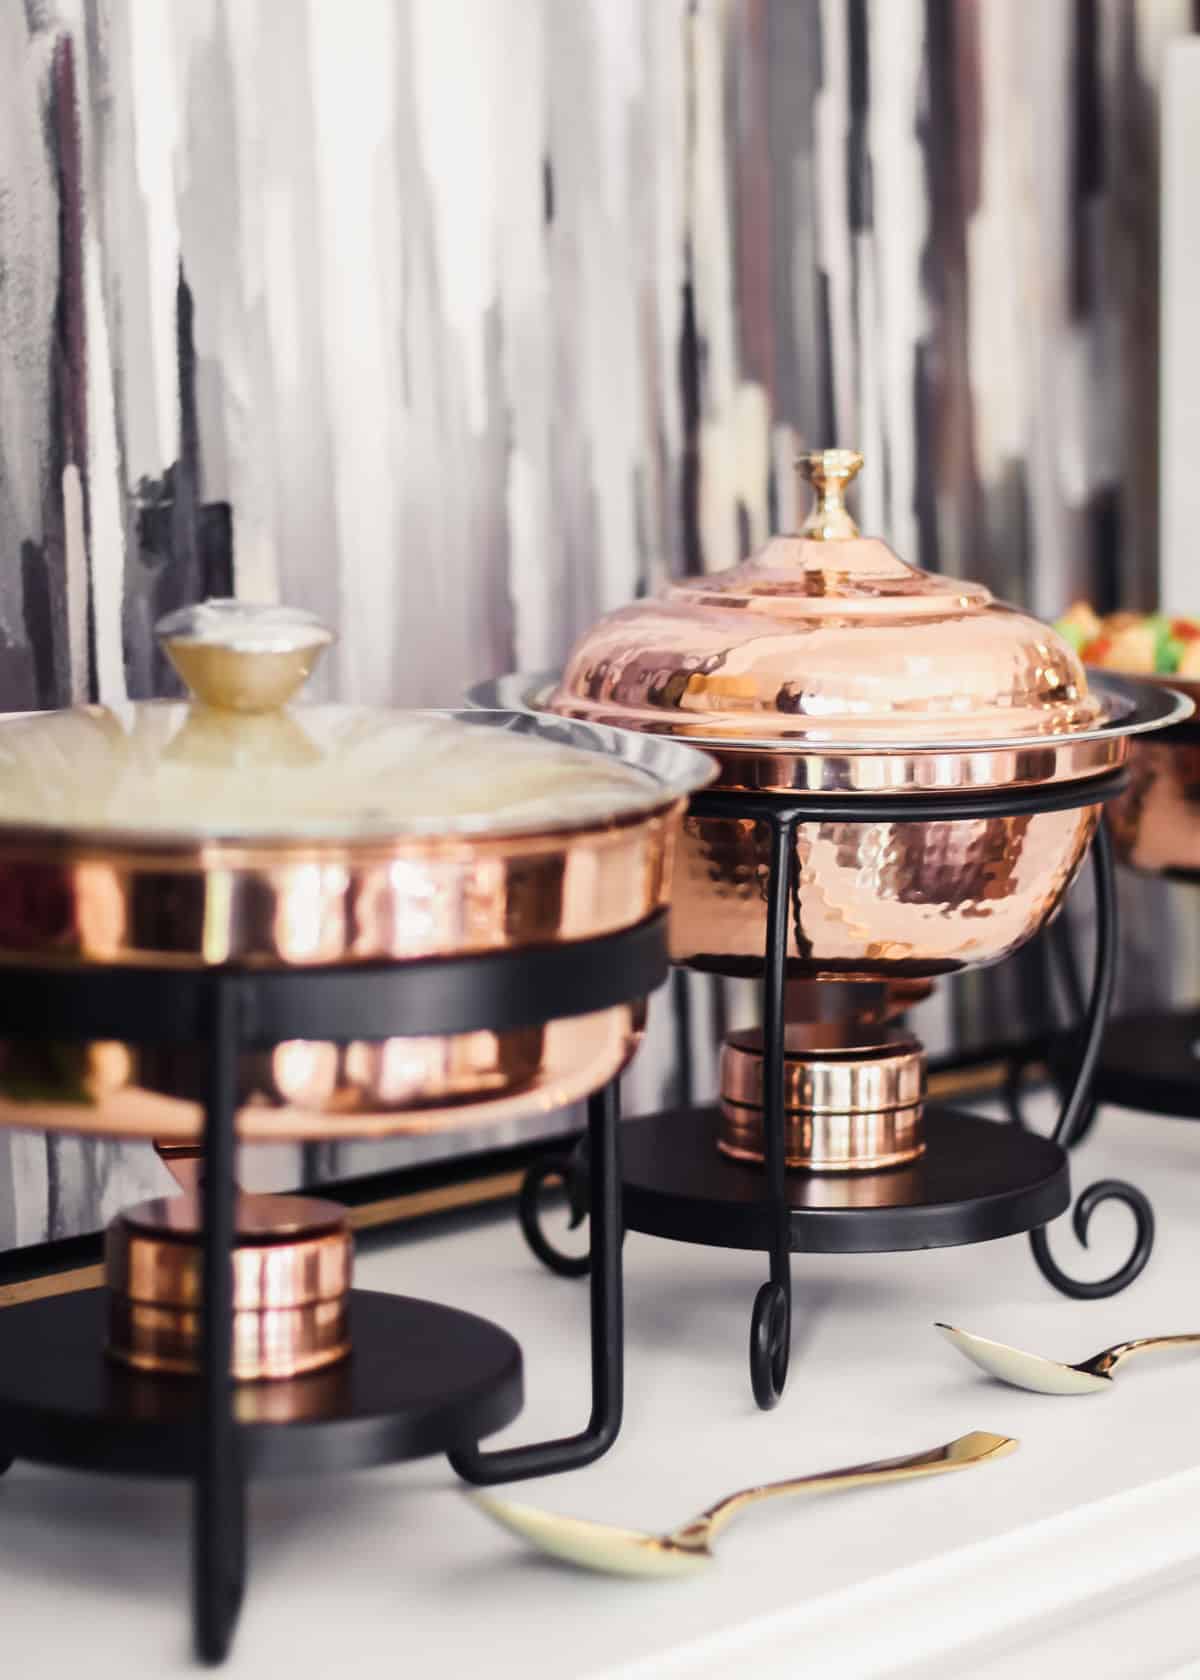 copper chafing dishes on white side board.